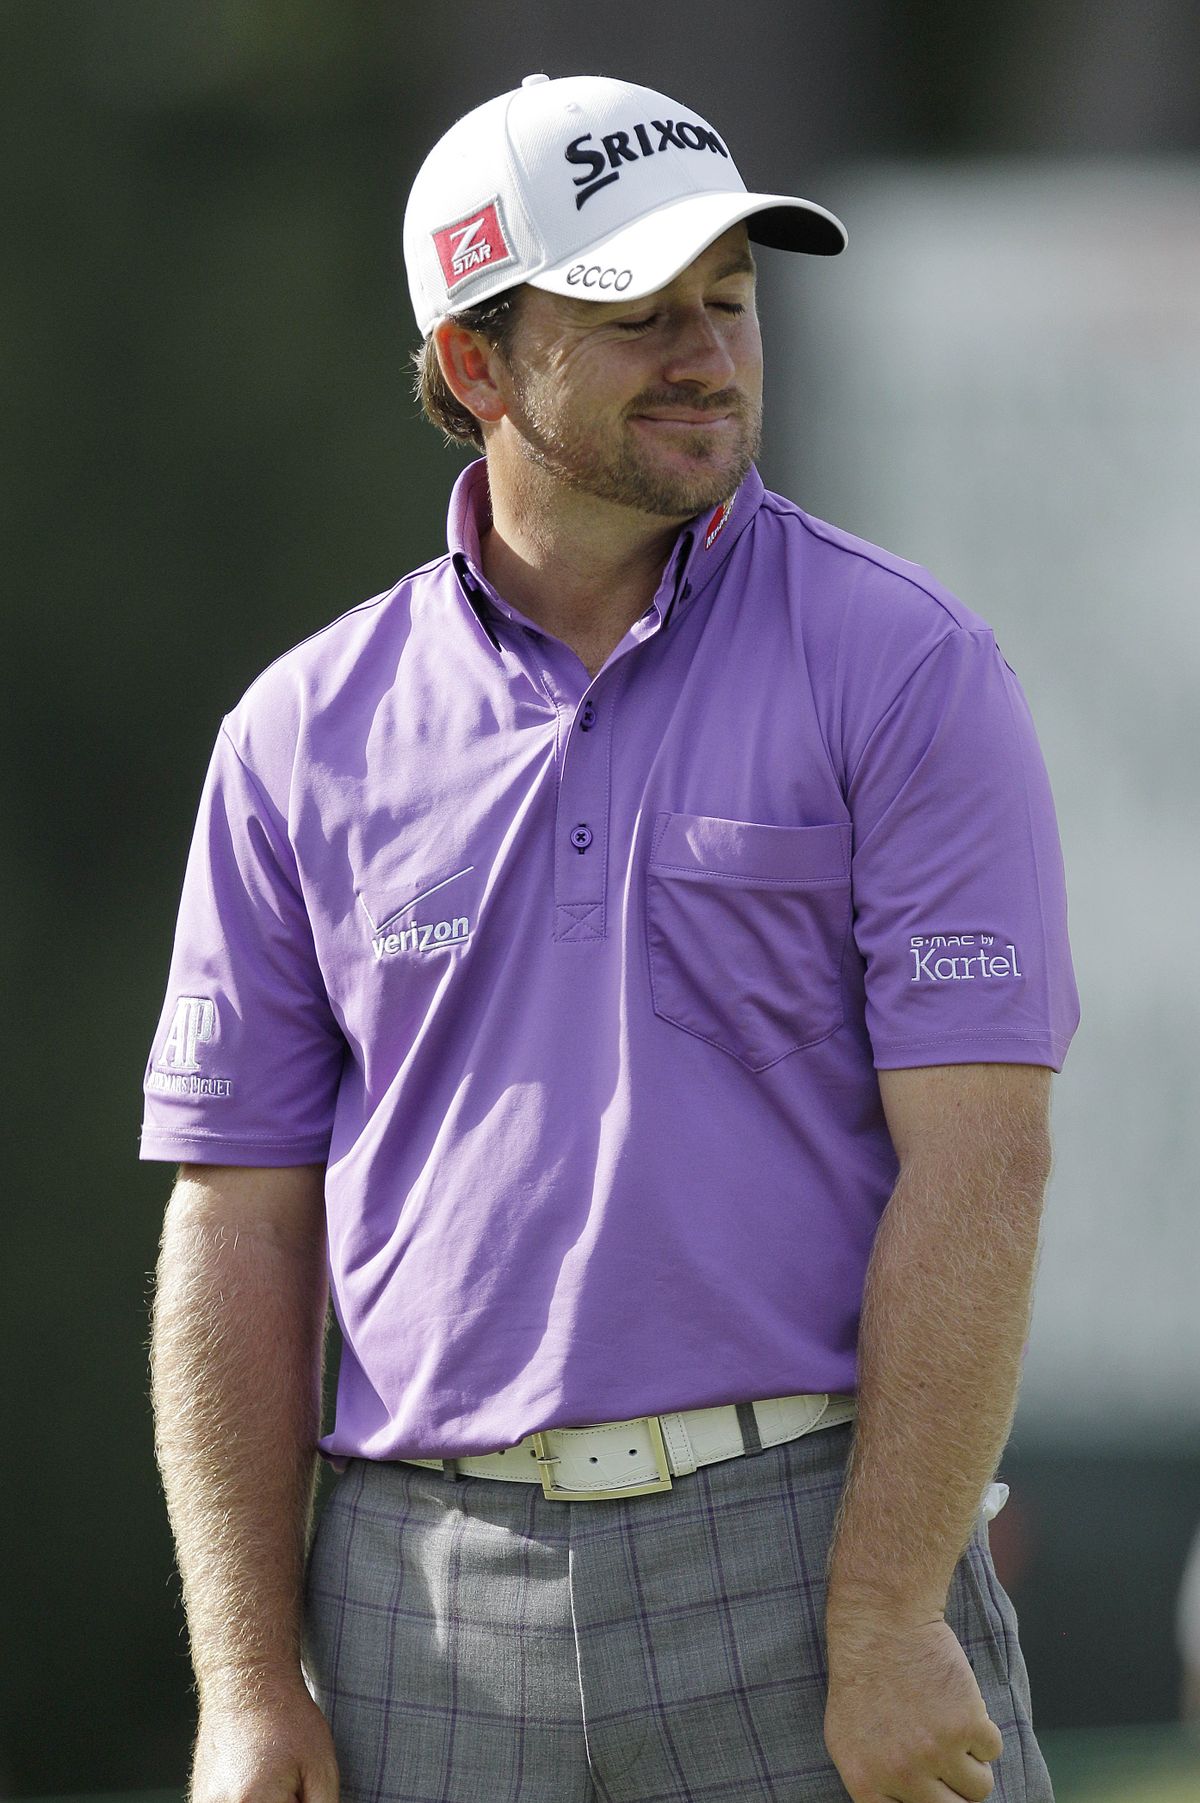 Third-round co-leader Graeme McDowell, the 2010 U.S. Open champion, grimaces after missing a putt on the 14th hole Saturday in San Francisco. (Associated Press)